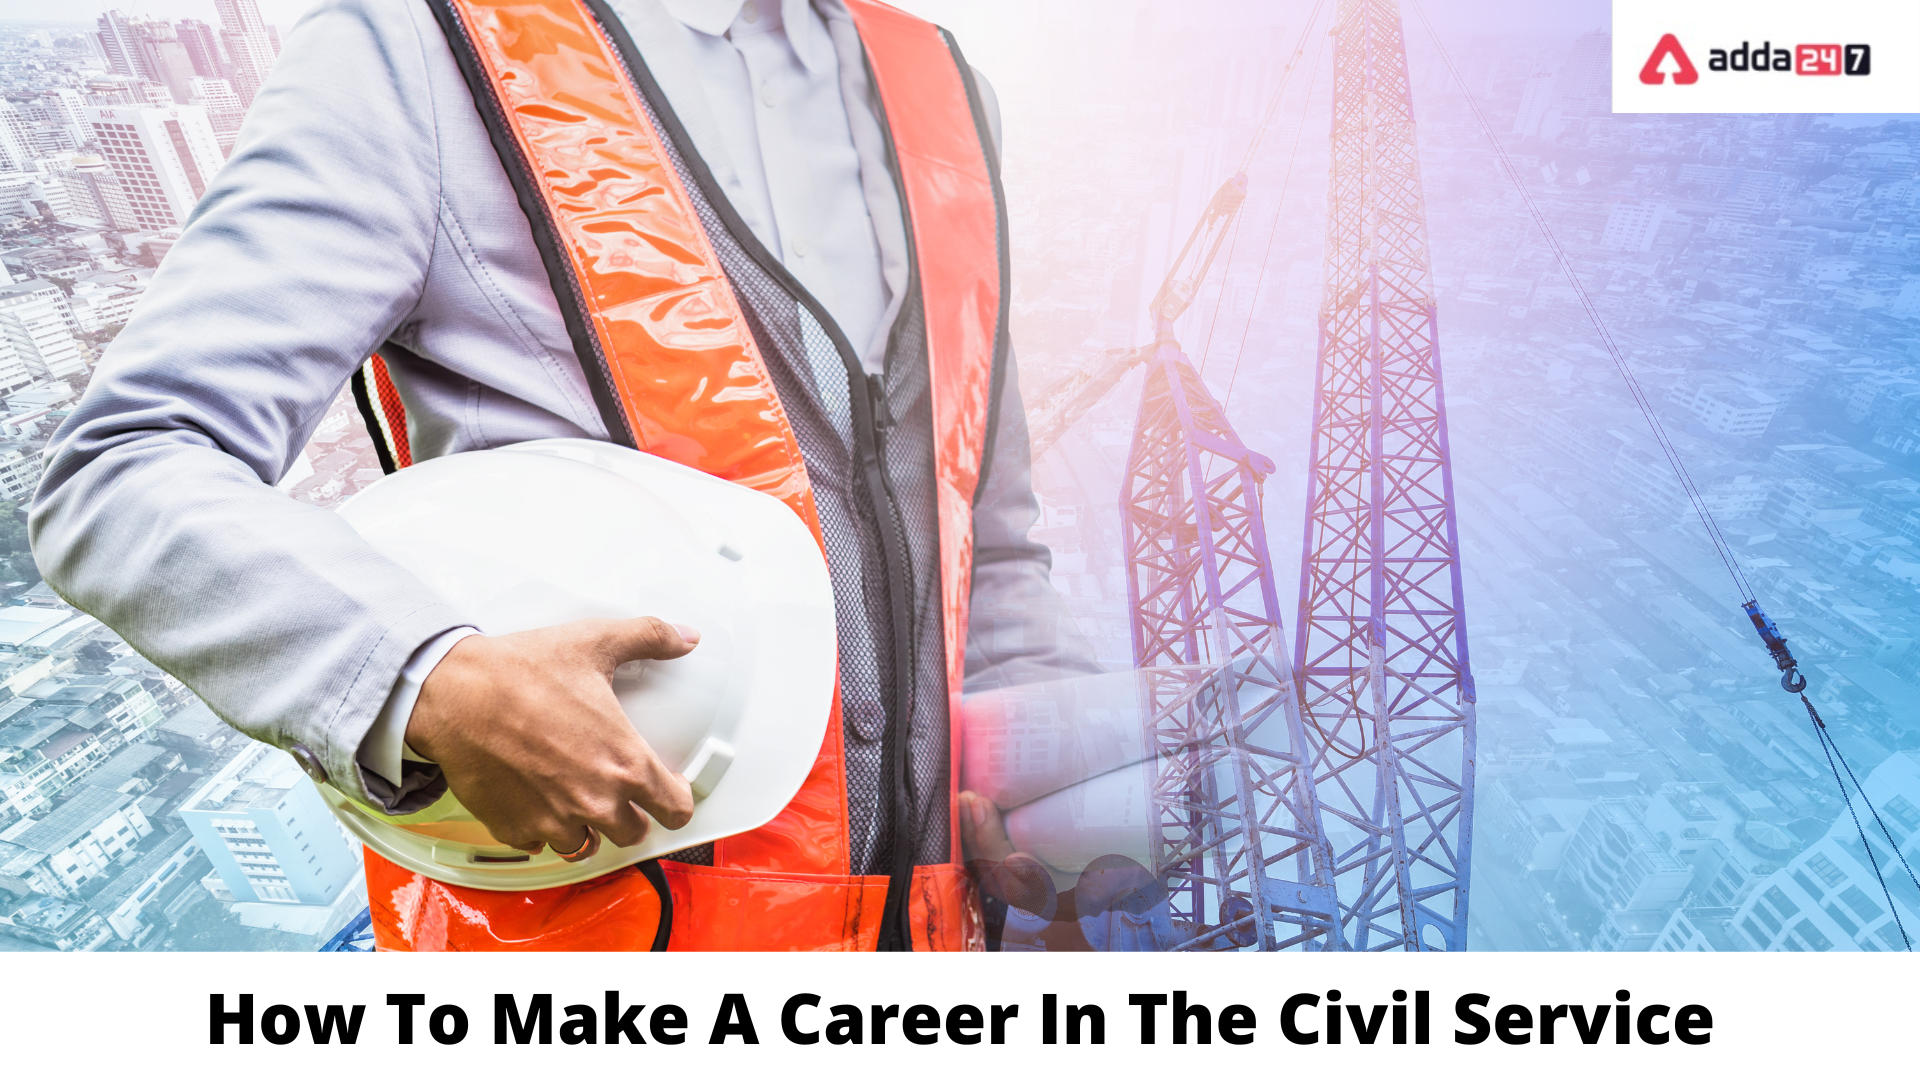 How To Make A Career In The Civil Service